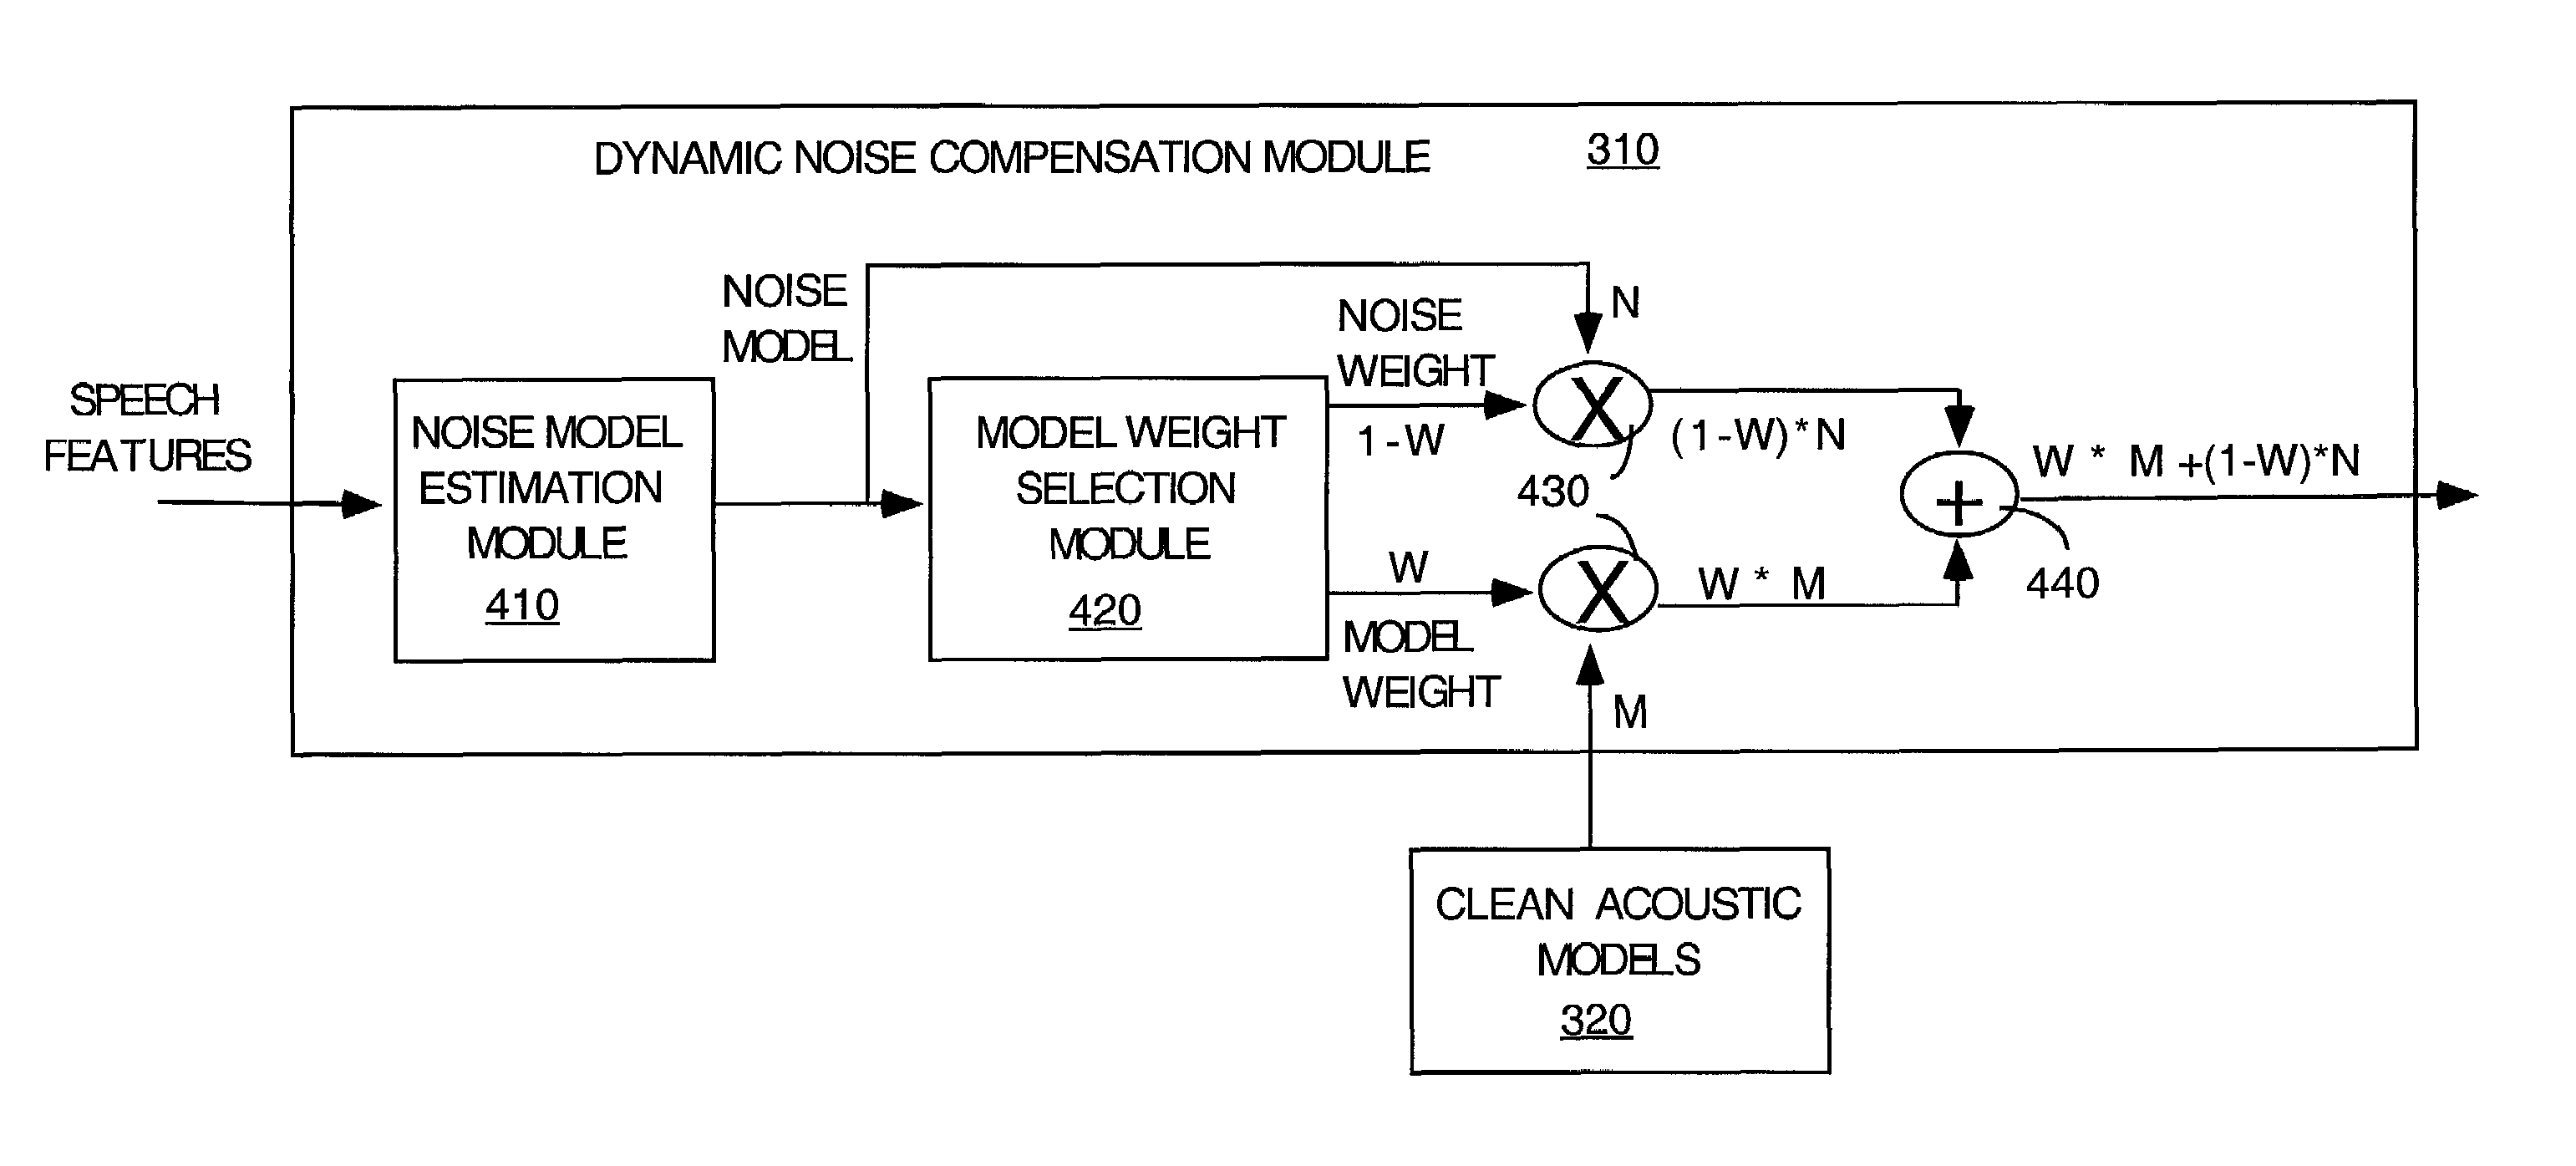 Method and apparatus for recognizing speech in a noisy environment